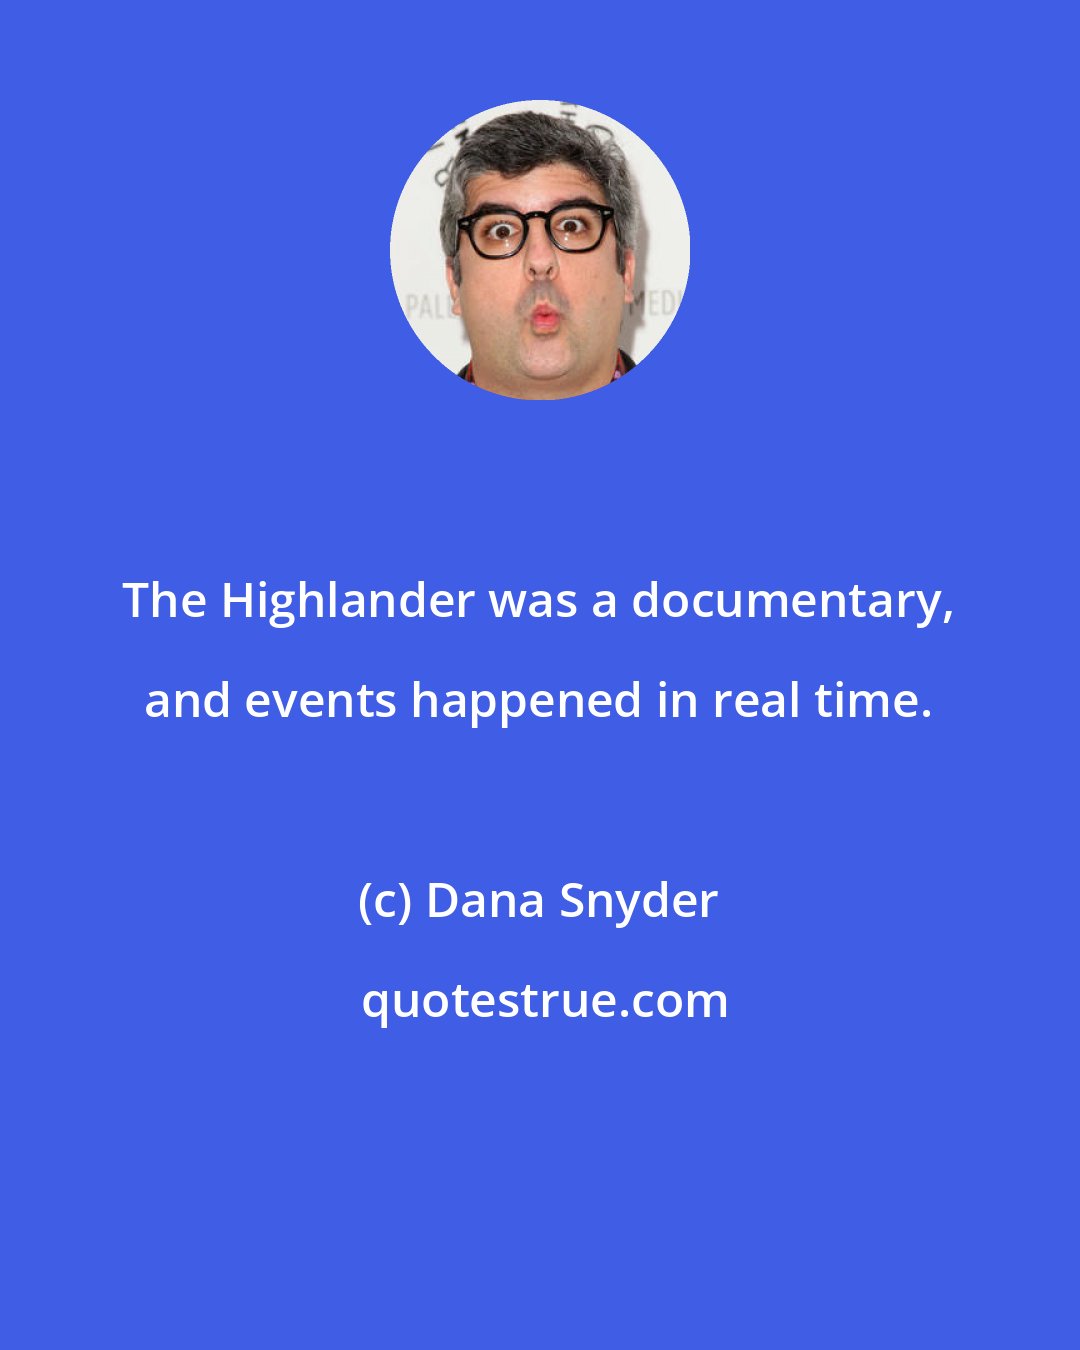 Dana Snyder: The Highlander was a documentary, and events happened in real time.